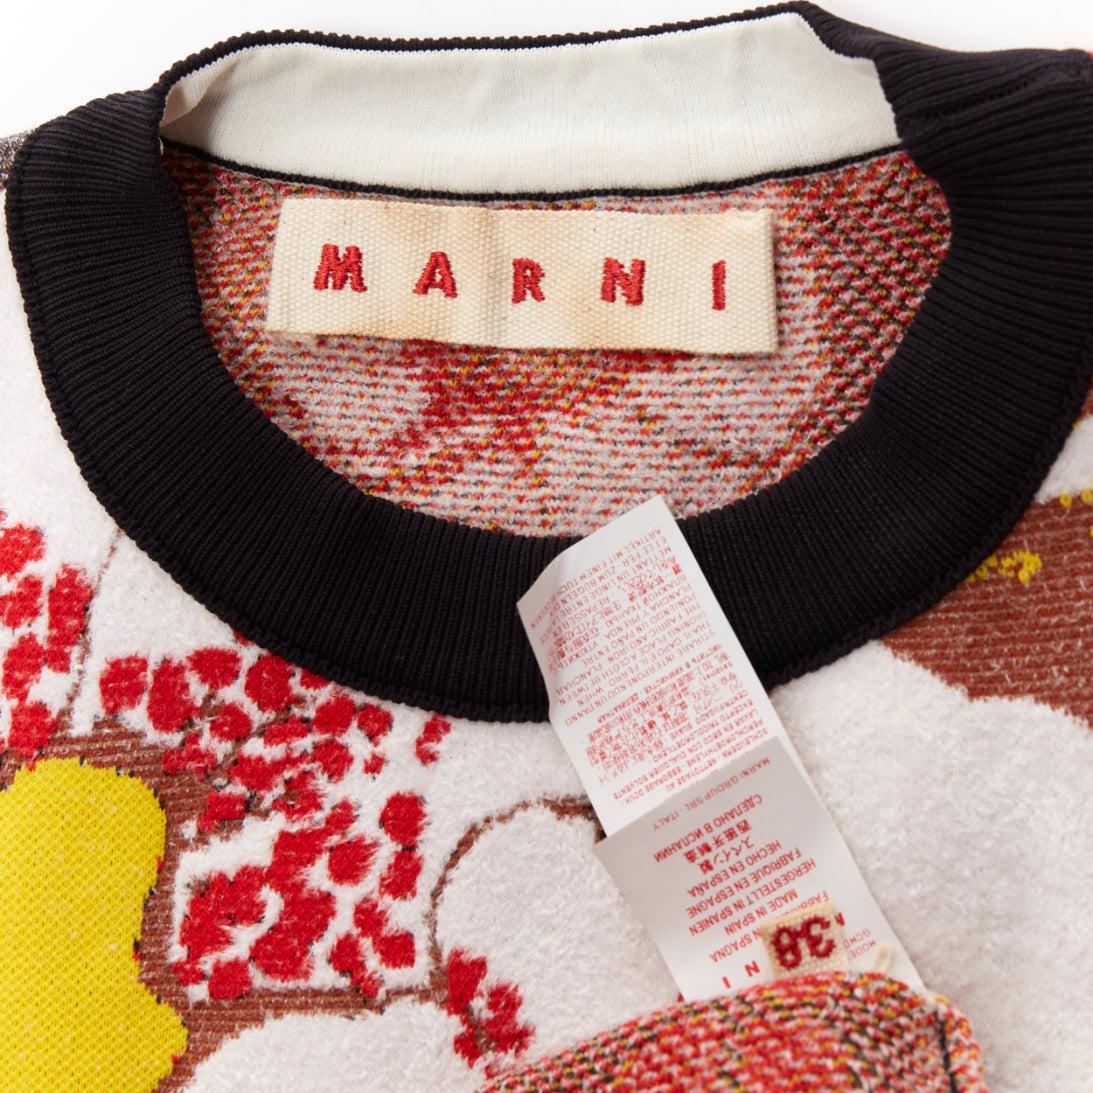 MARNI japanese blossom floral jacquard boxy knitted sweater top IT38 XS For Sale 3